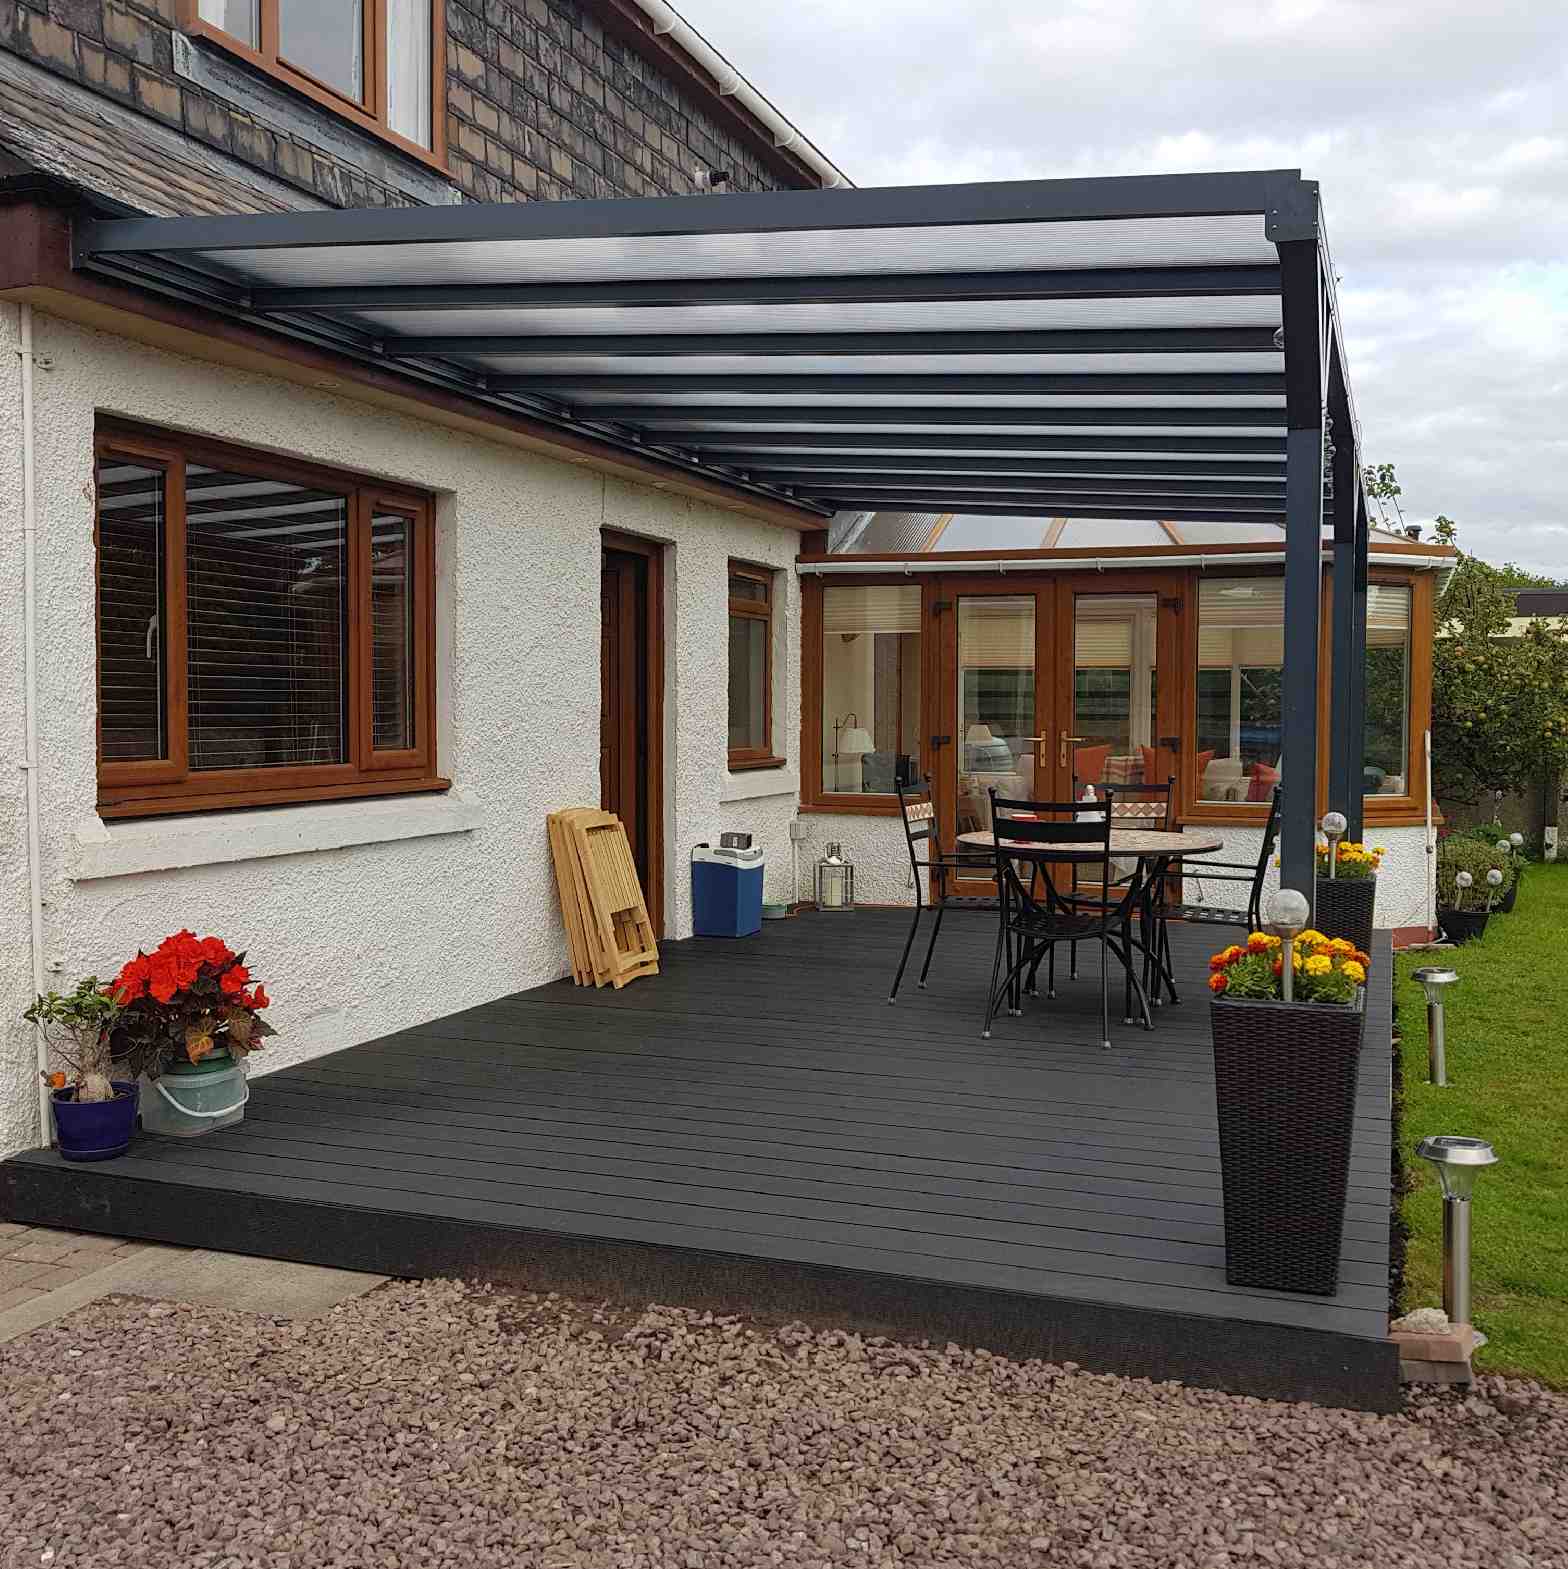 Buy Omega Verandah, Anthracite Grey, 16mm Polycarbonate Glazing - 7.8m (W) x 3.5m (P), (4) Supporting Posts online today